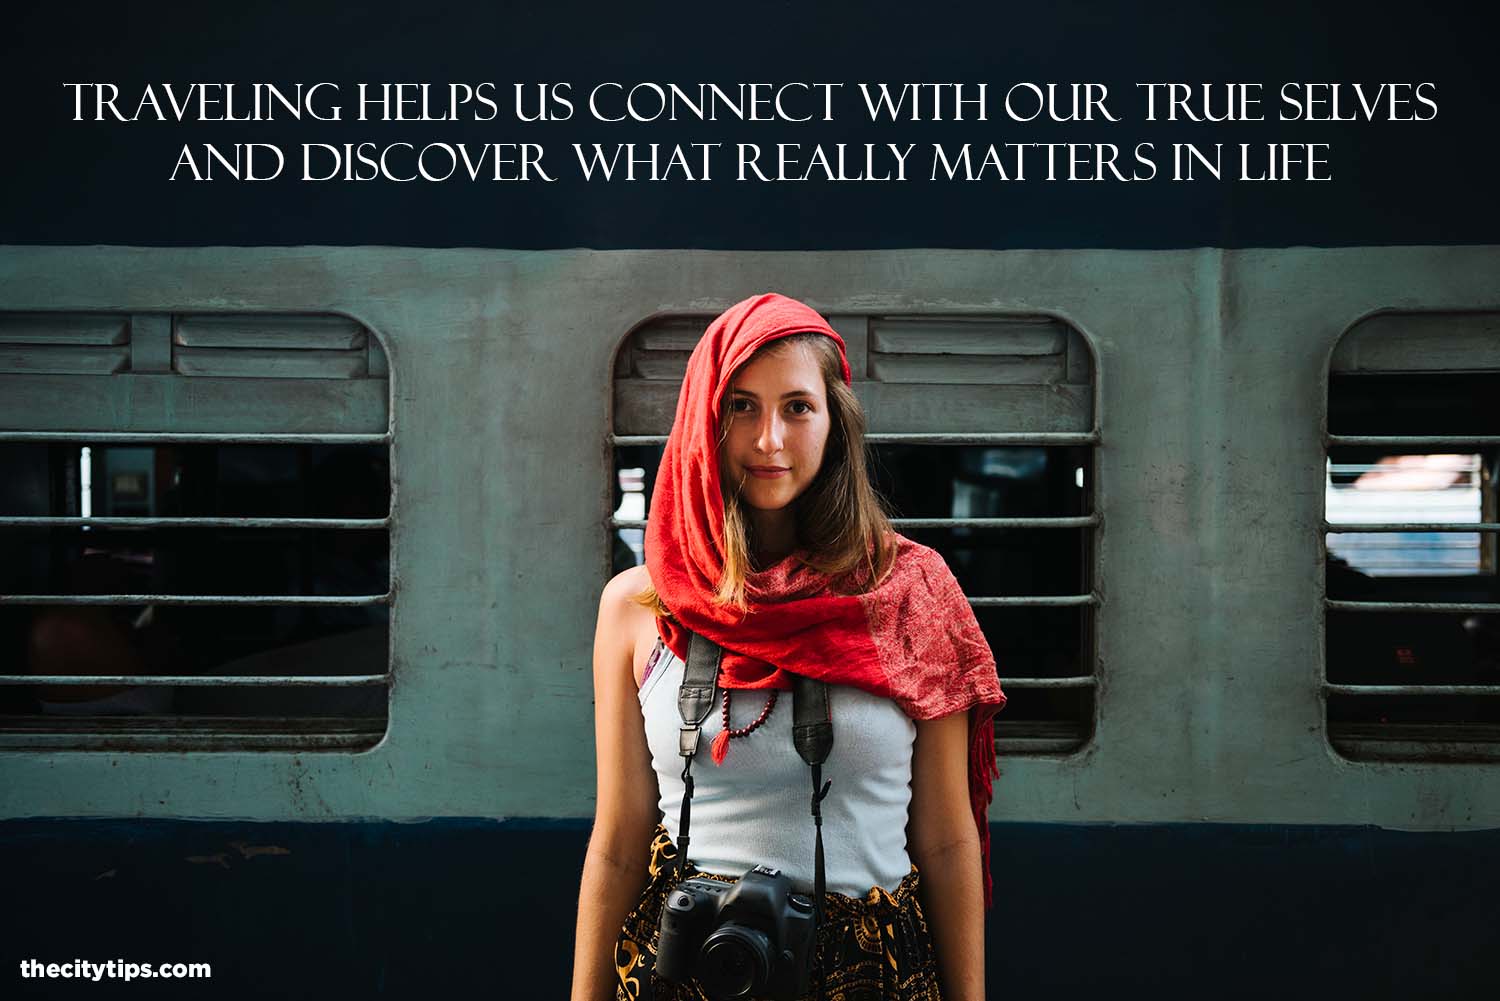 "Traveling helps us connect with our true selves and discover what really matters in life." by Anonymous